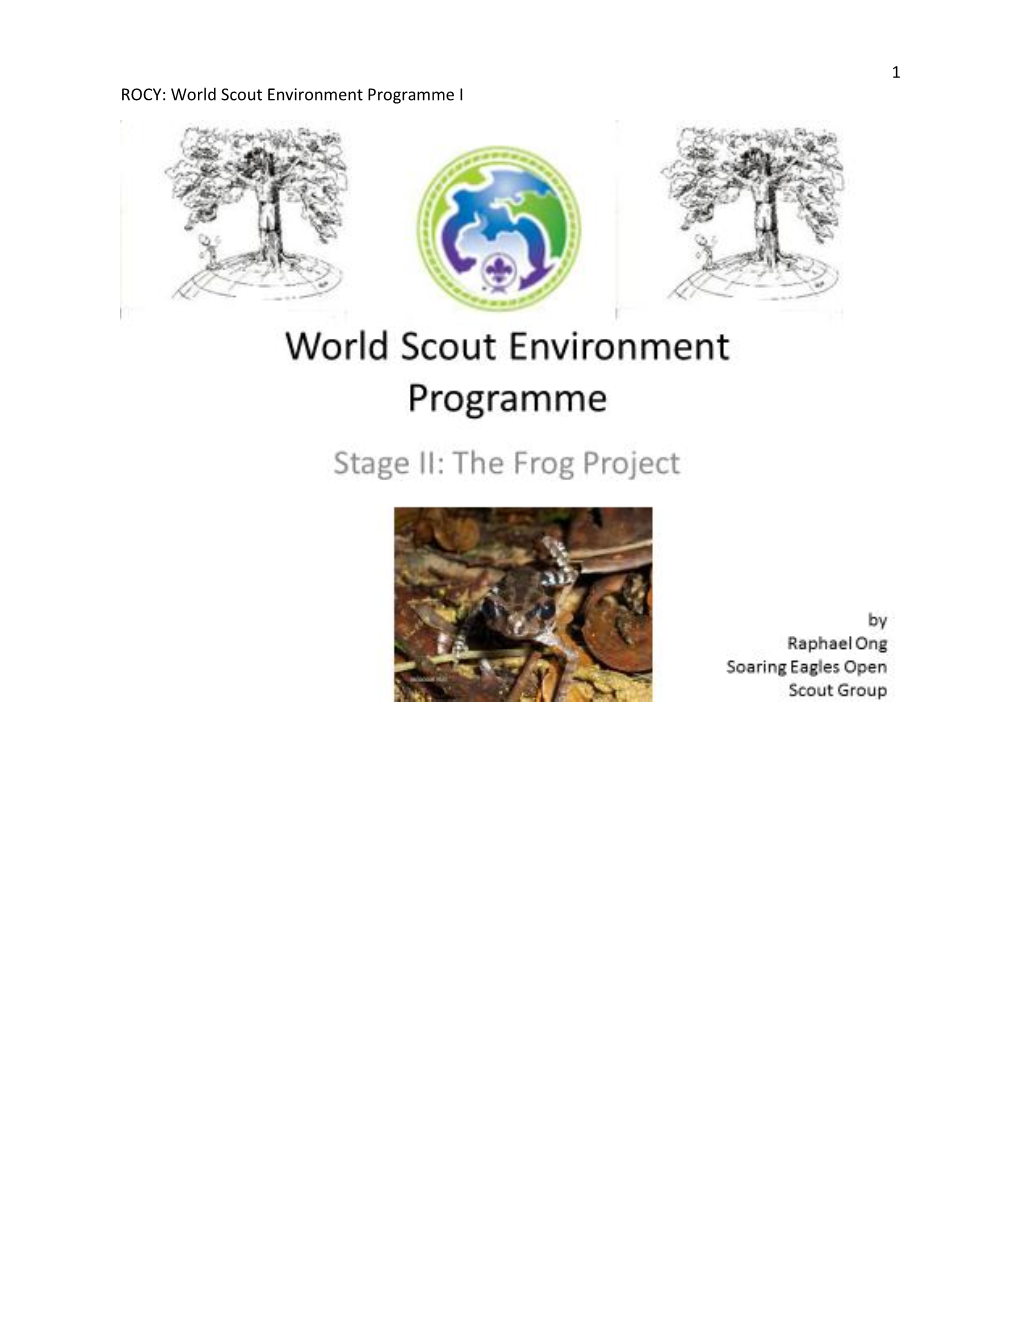 World Scout Environment Programme I